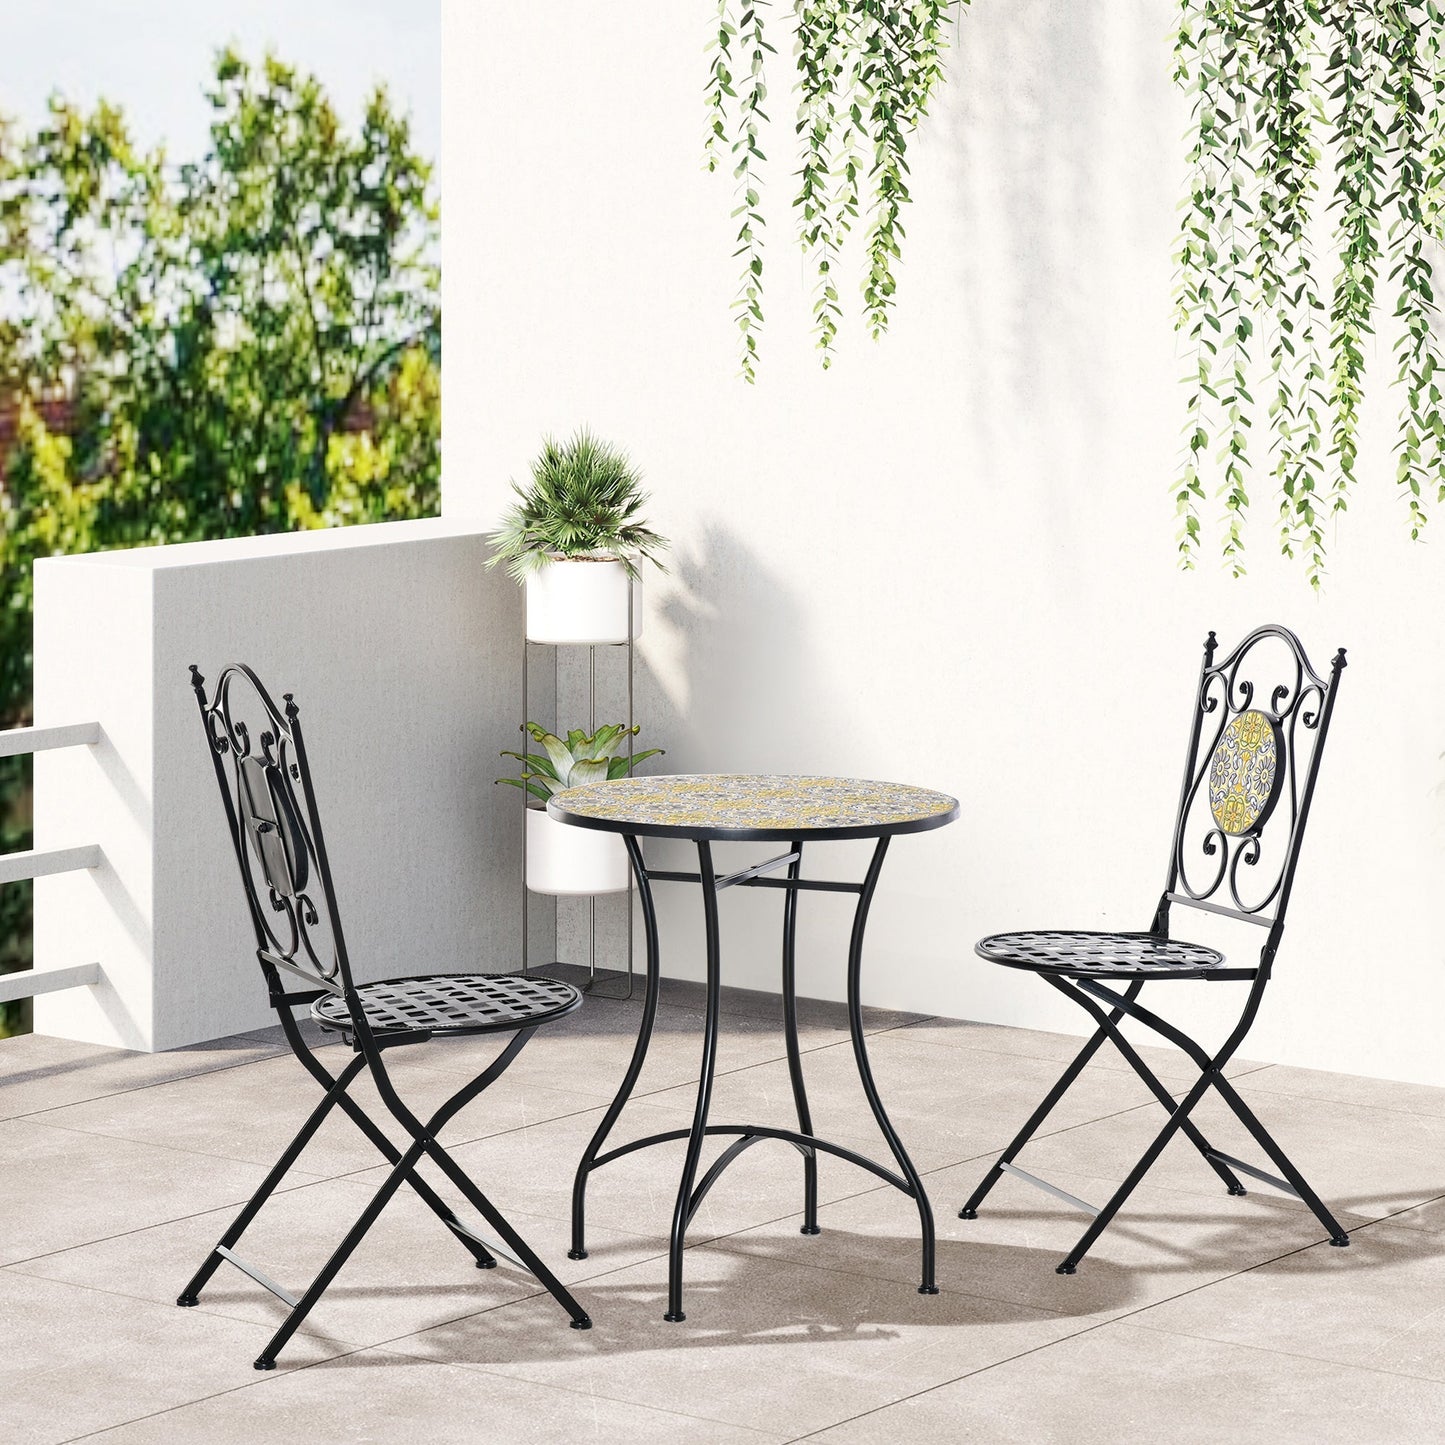 MAIOLICA | 3 Pcs Balcony Table and Chairs Set